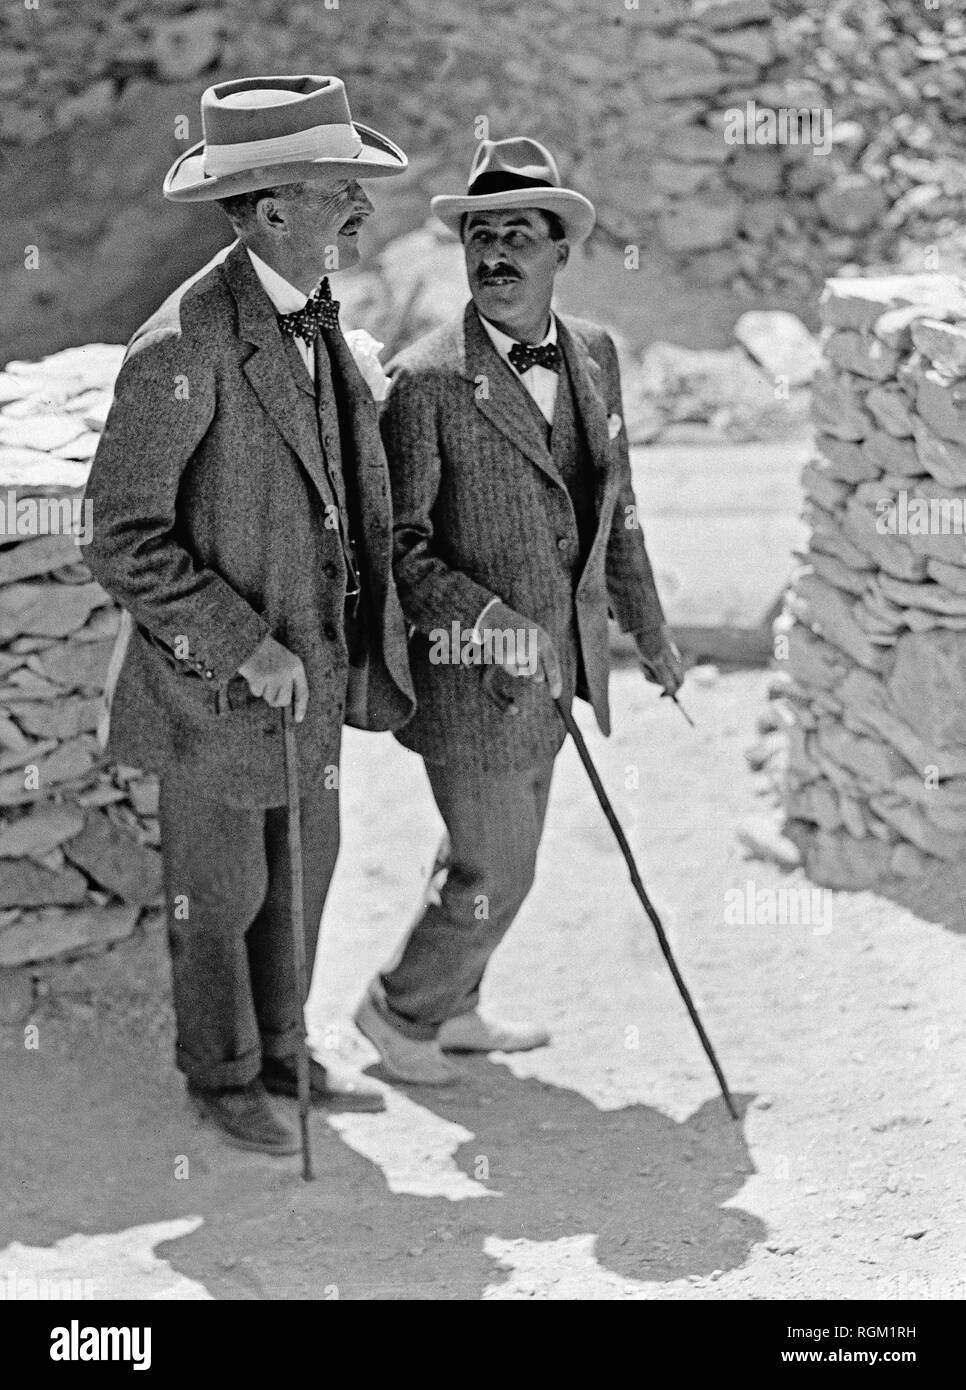 Howard Carter who discovered Tutankhamun's Tomb in the Valley of the Kings, Luxor, Egypt. November 1922. Lord Carnarvon ( left ) talking to Howard Carter in the Valley of the Kings, Luxor, Egypt. Scanned from image material in the archives of Press Portrait Service - (formerly Press Portrait Bureau). Stock Photo